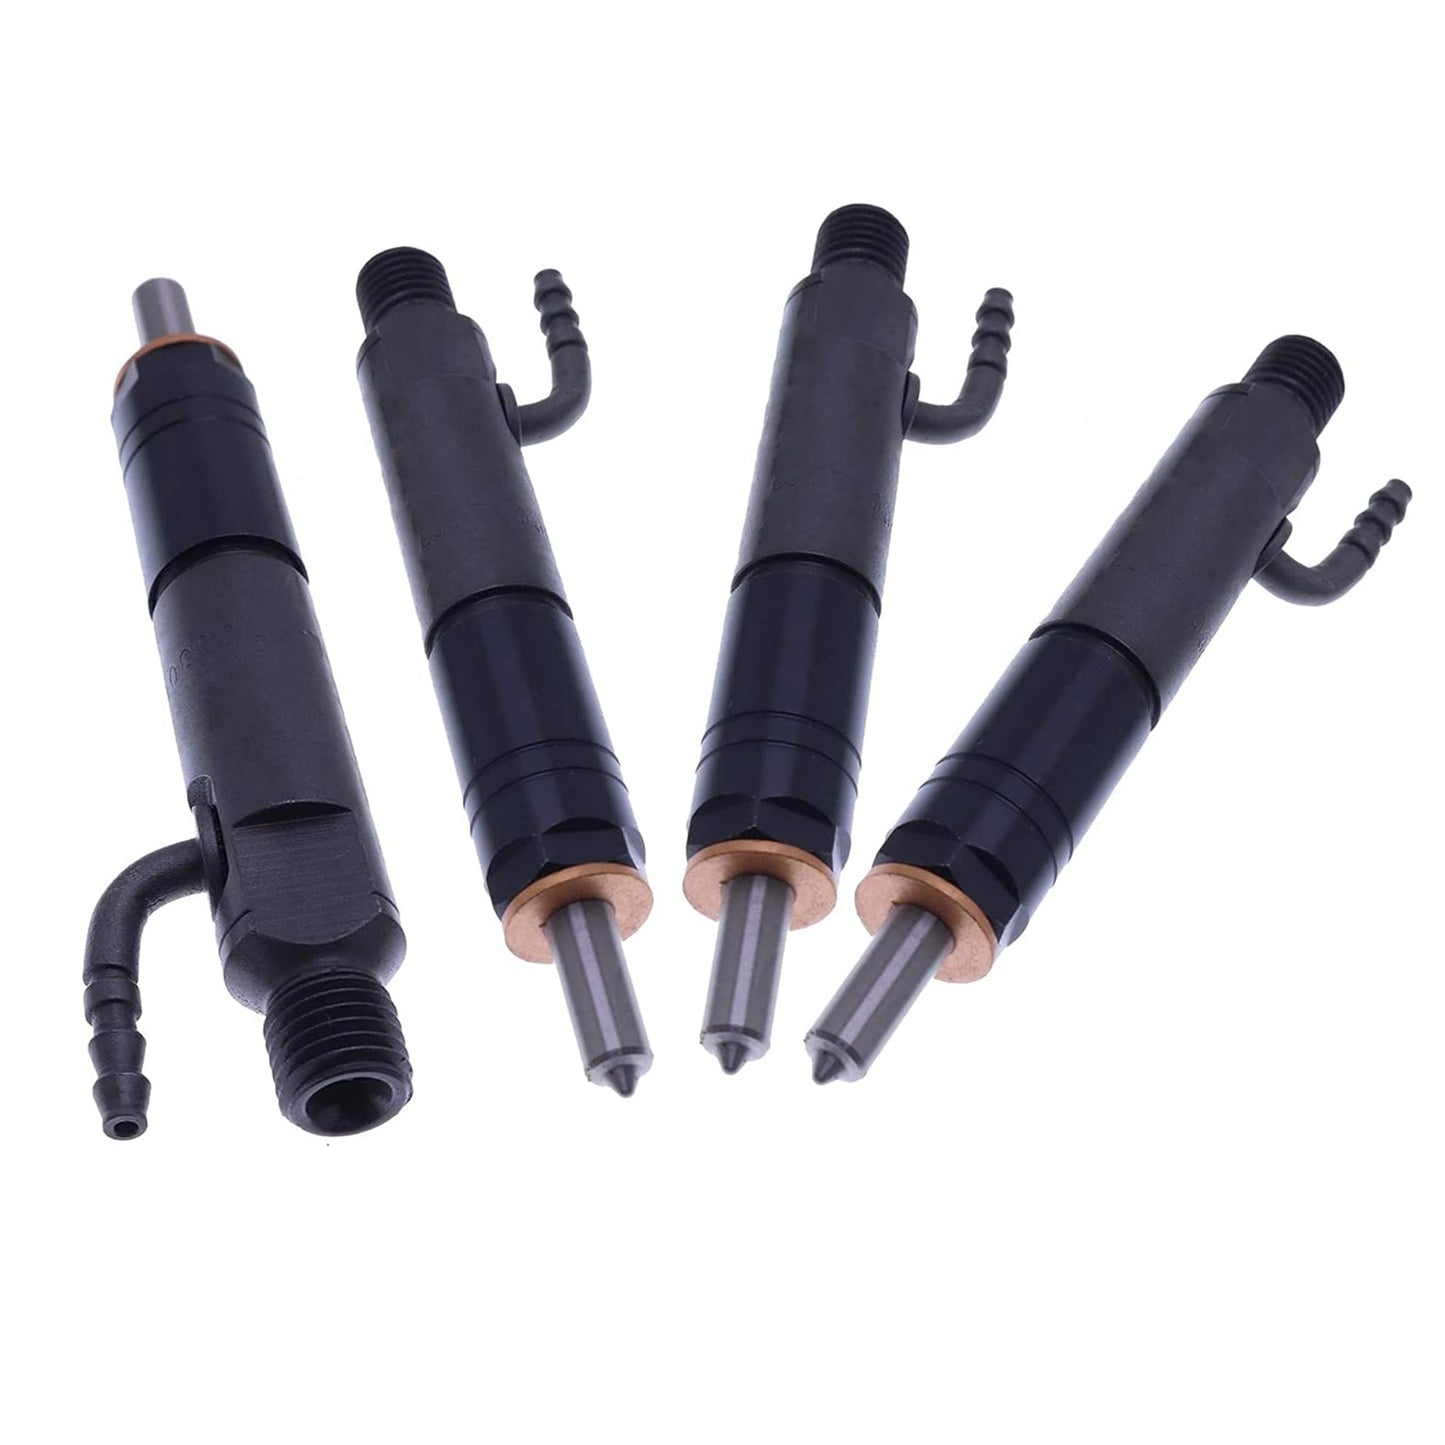 4X 751-19700 Fuel Injector Compatible With Lister Petter LPW Engines LPW4 LPW3 LPW2